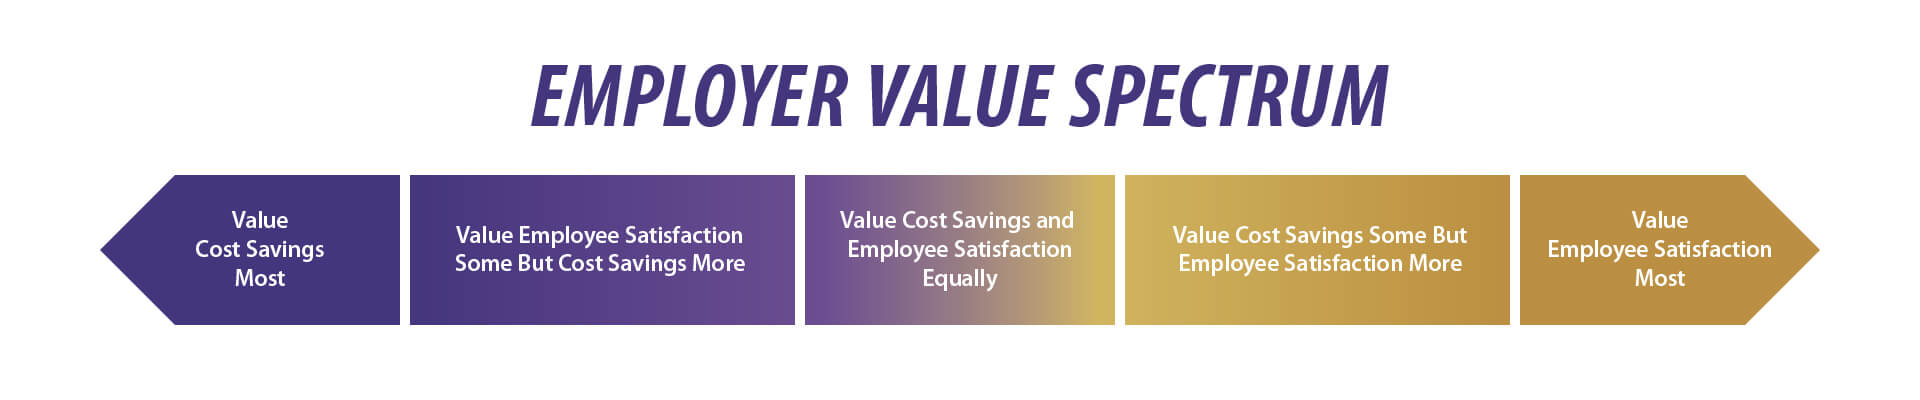 Employer value spectrum explaining the benefits of ART for emoployers. Gold and purple